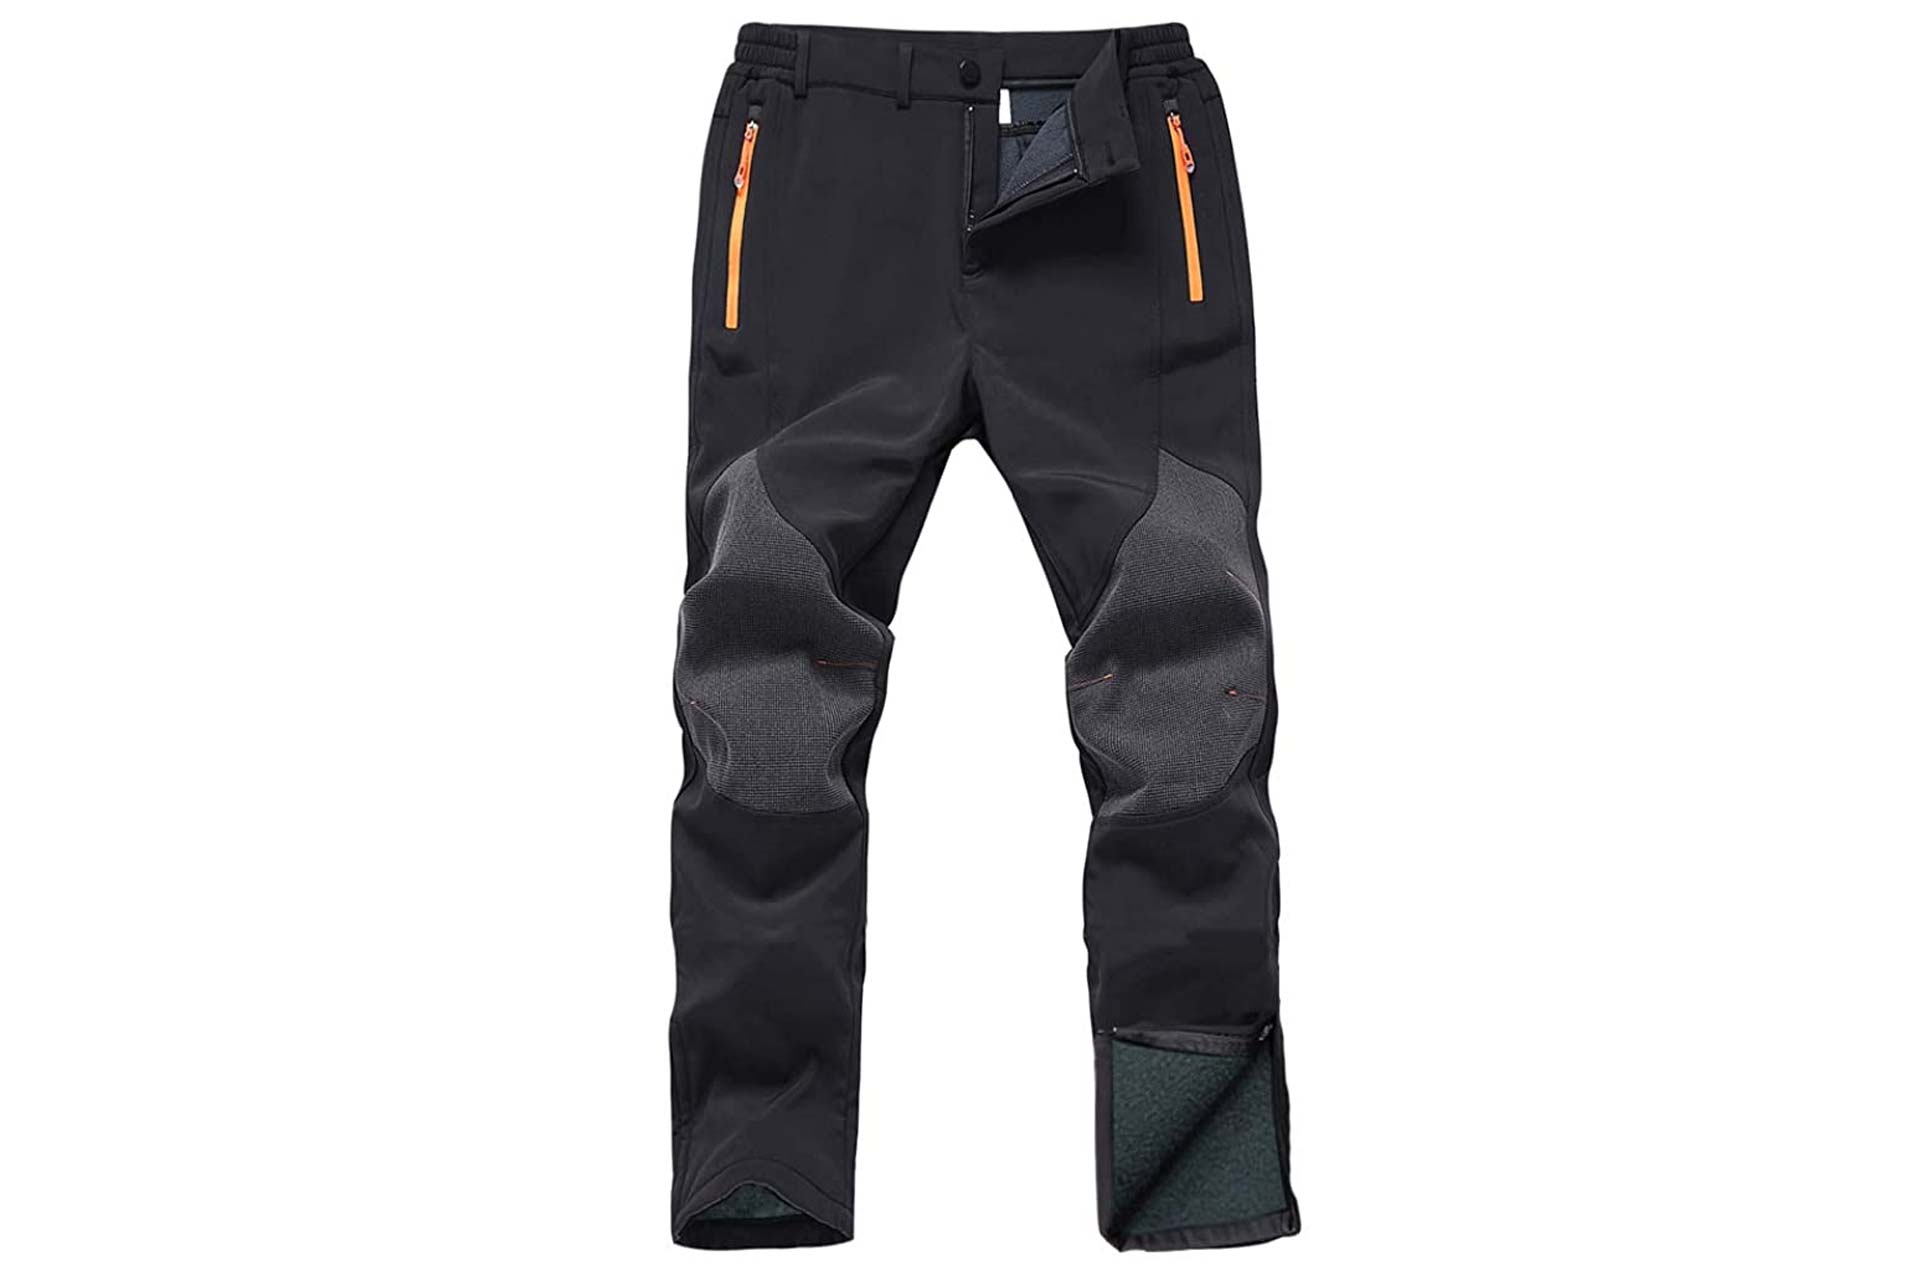 Snow Pants Let You Forget About the Cold